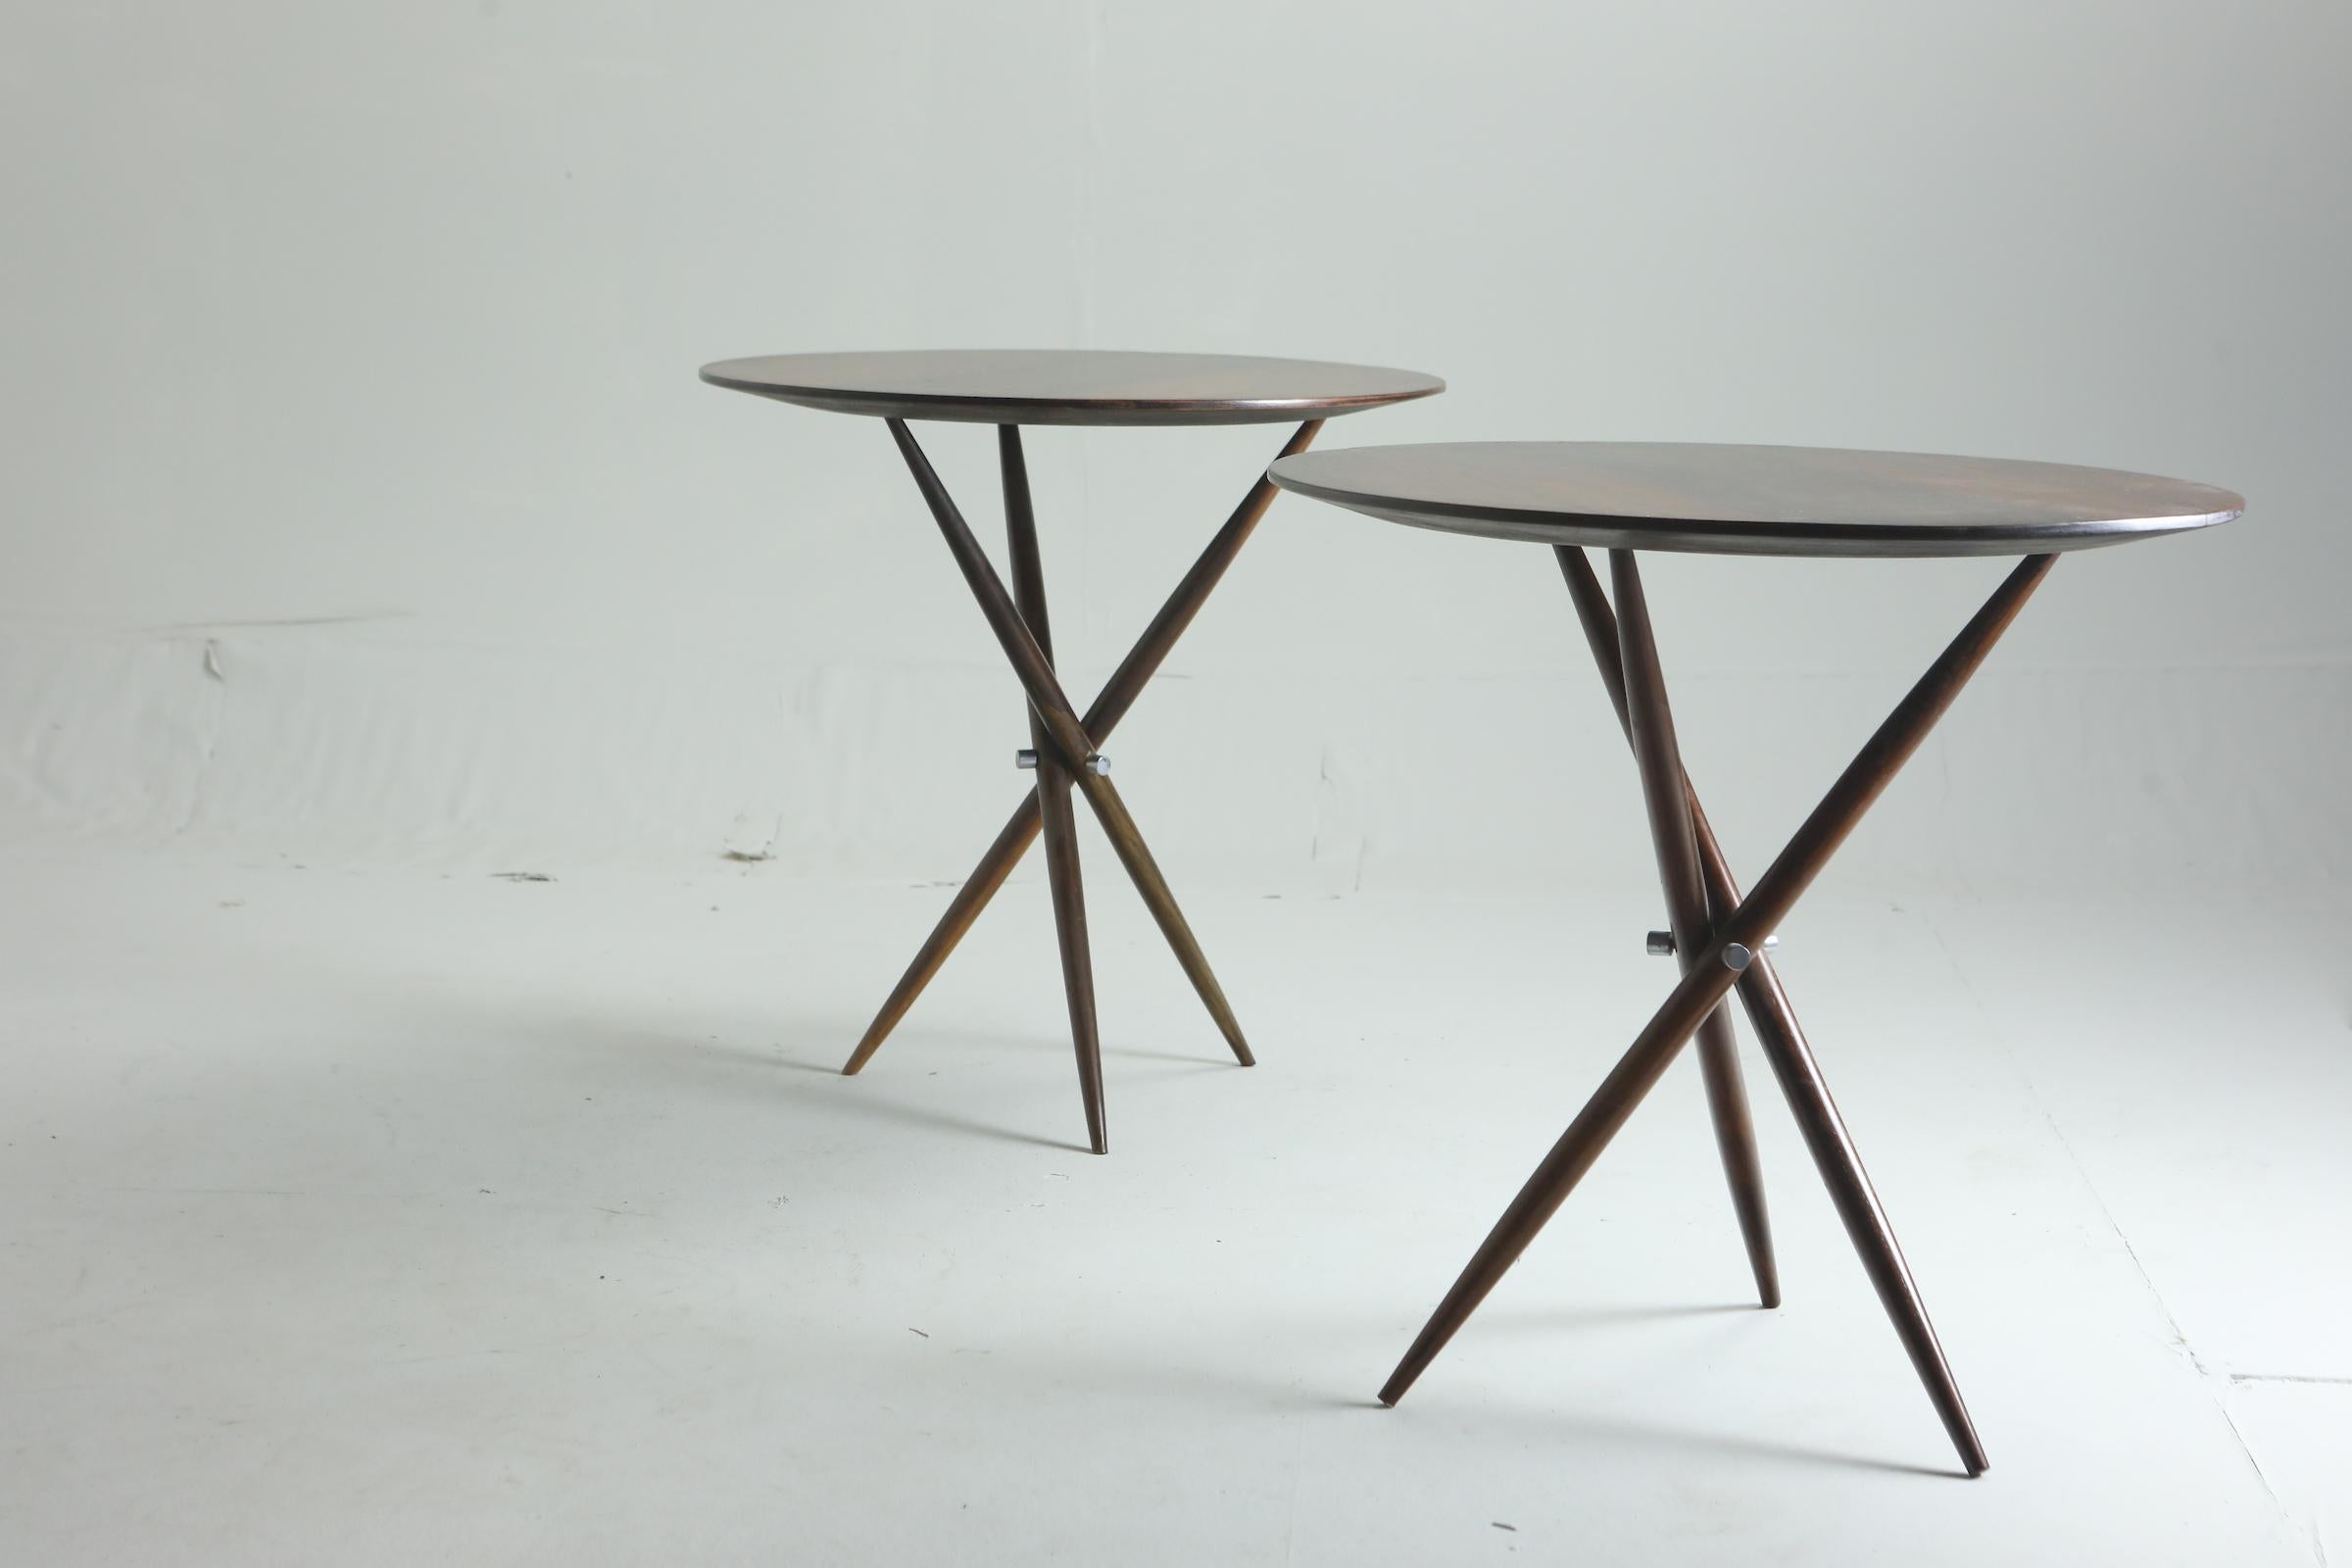 Mid-Century Modern pair of Janete round side tables by Sergio Rodrigues, Brazil 1950s

The elegant Janete side table is a 1950s creation by the acclaimed Brazilian architect and designer Sergio Rodrigues. Structured in wood, this table features a